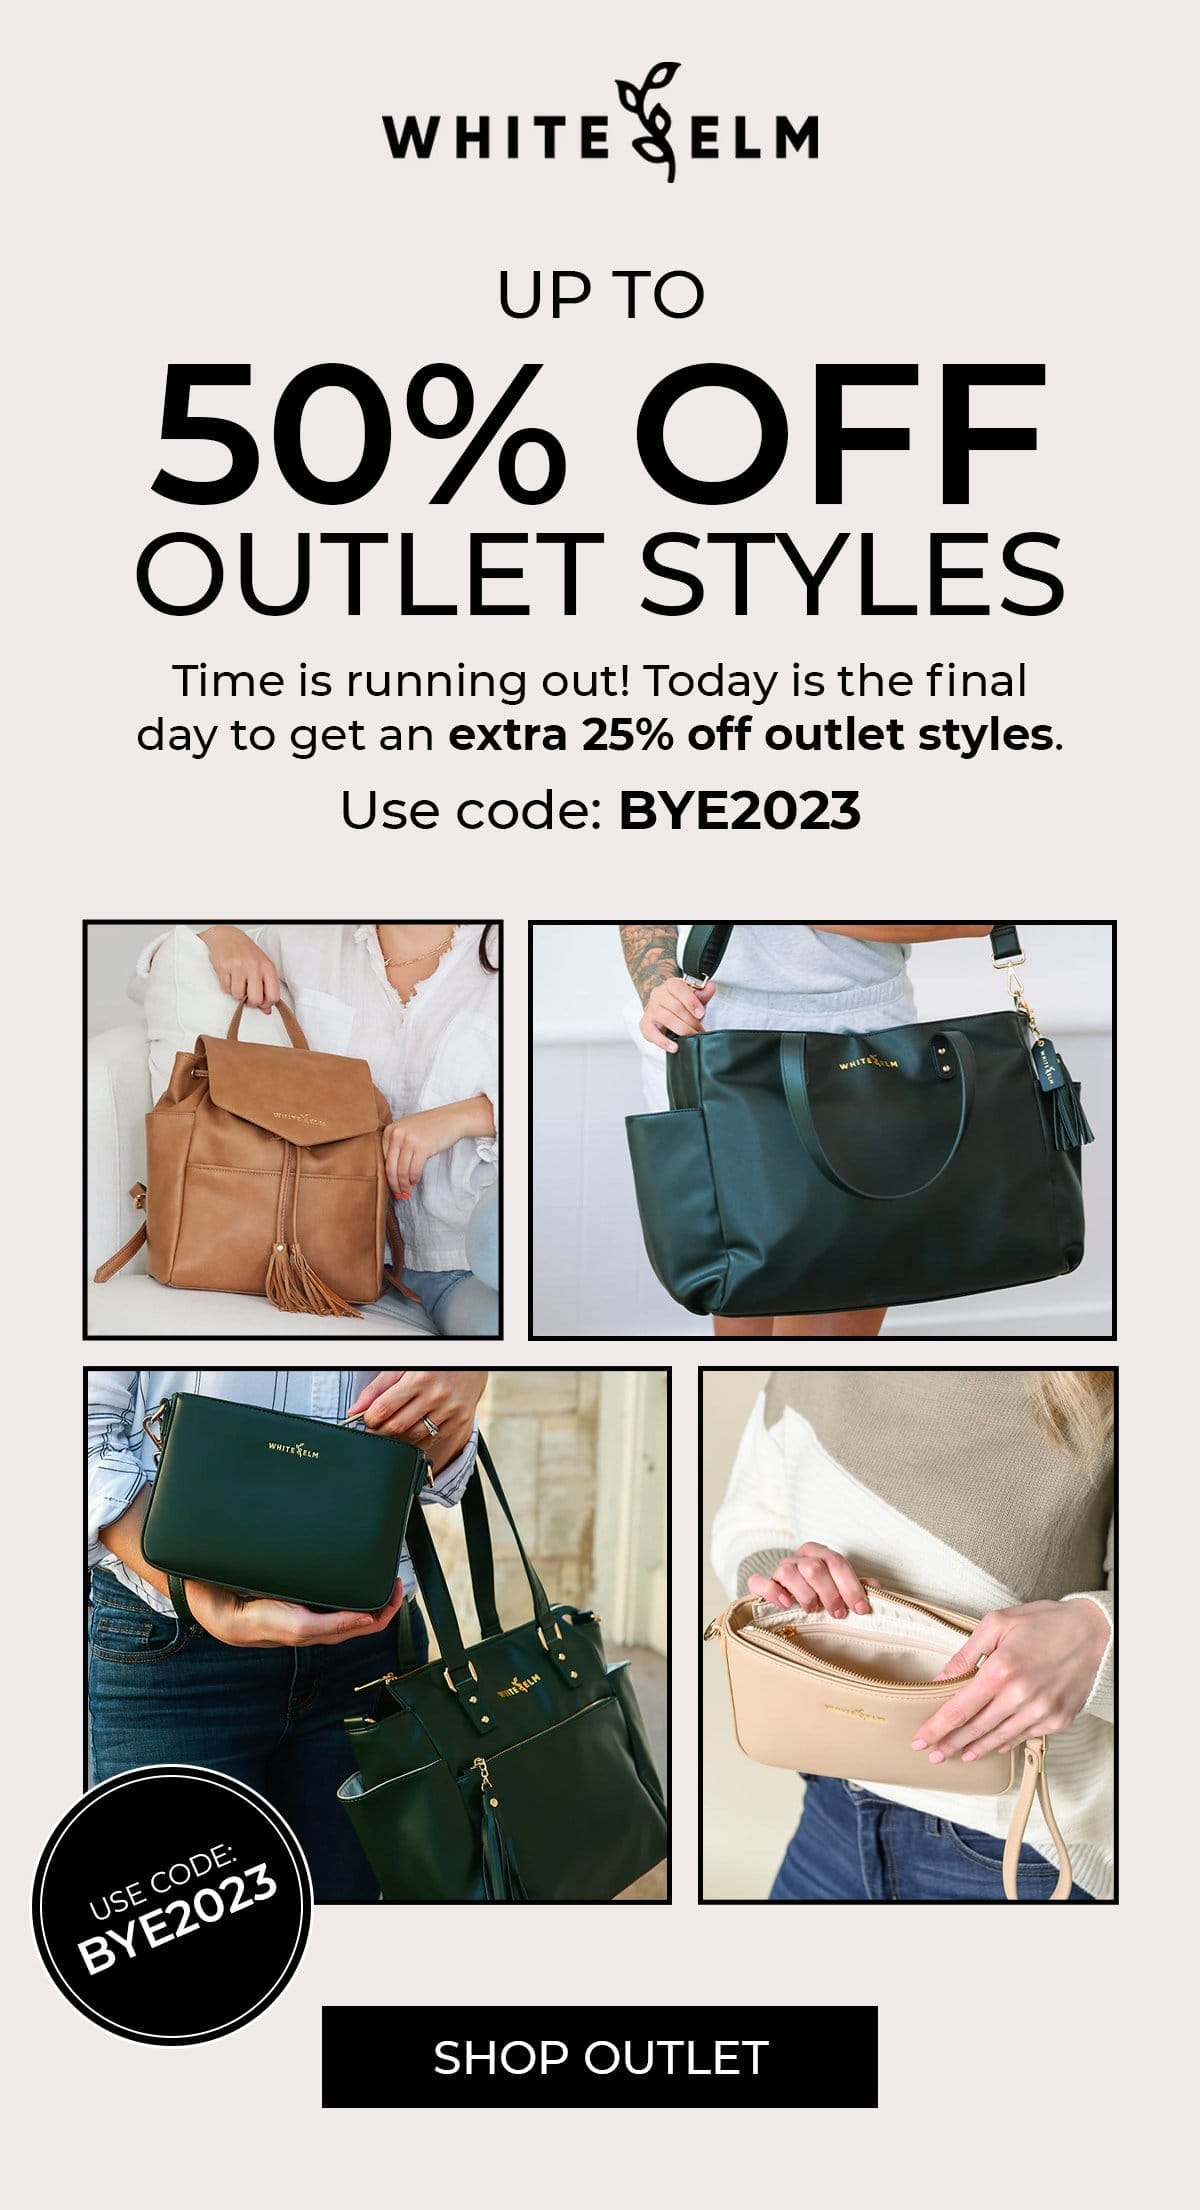 Up to 50% OFF Outlet Styles